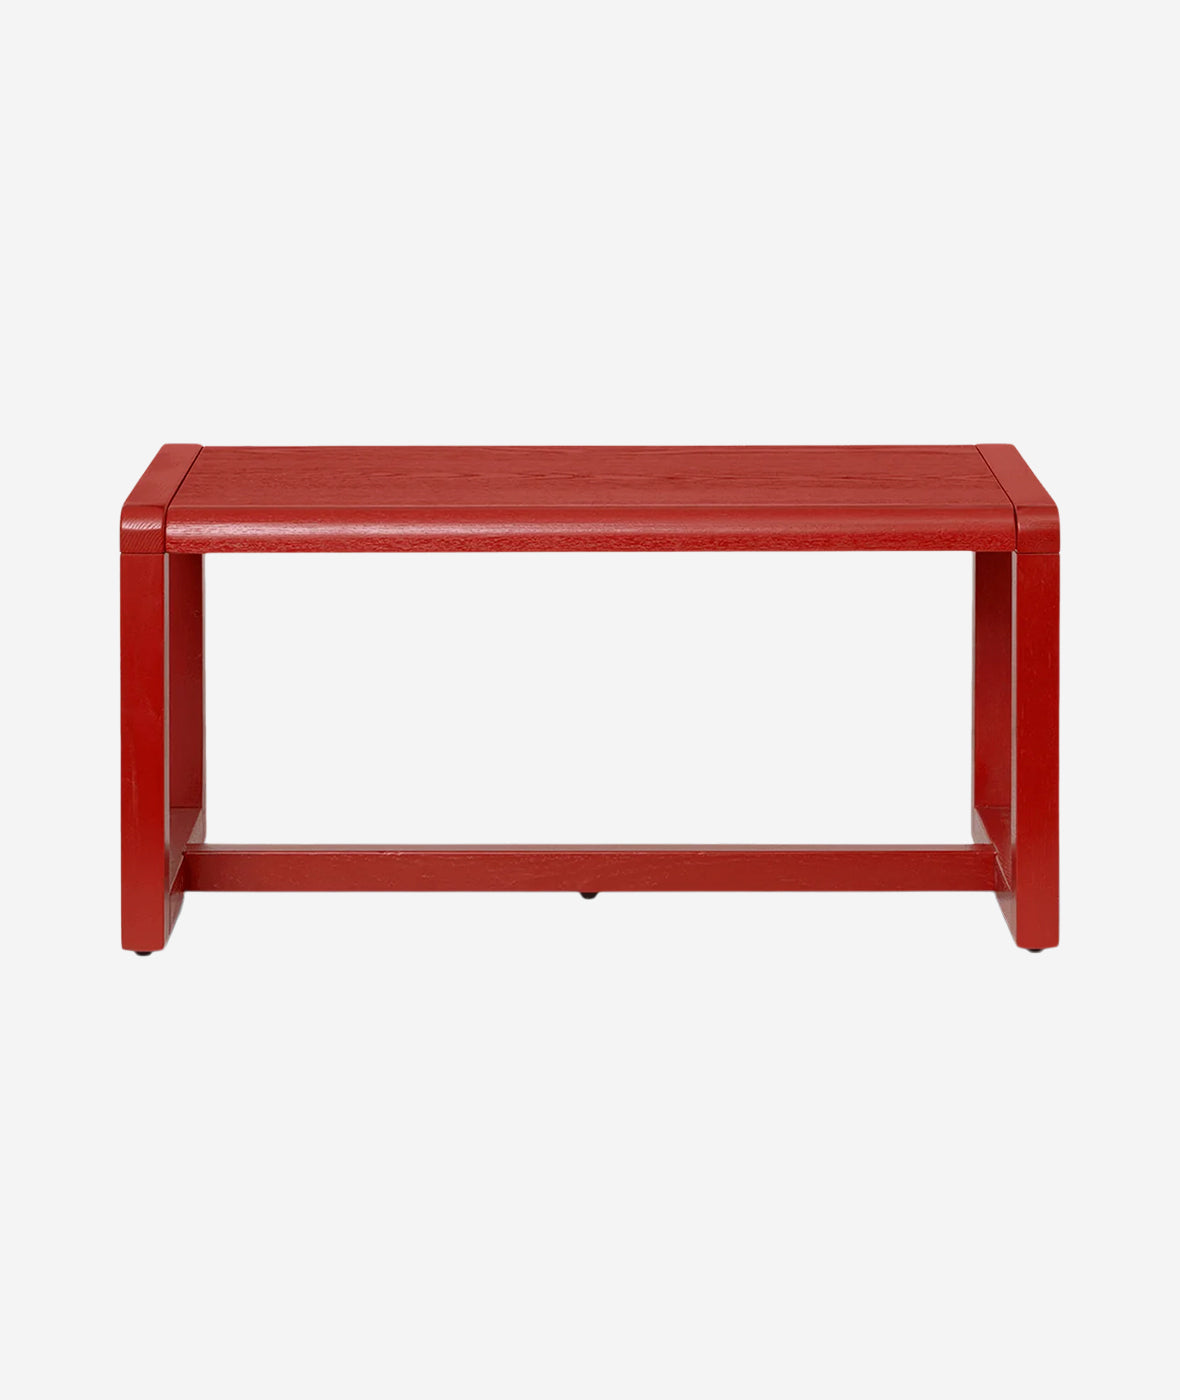 Little Architect Bench - More Options